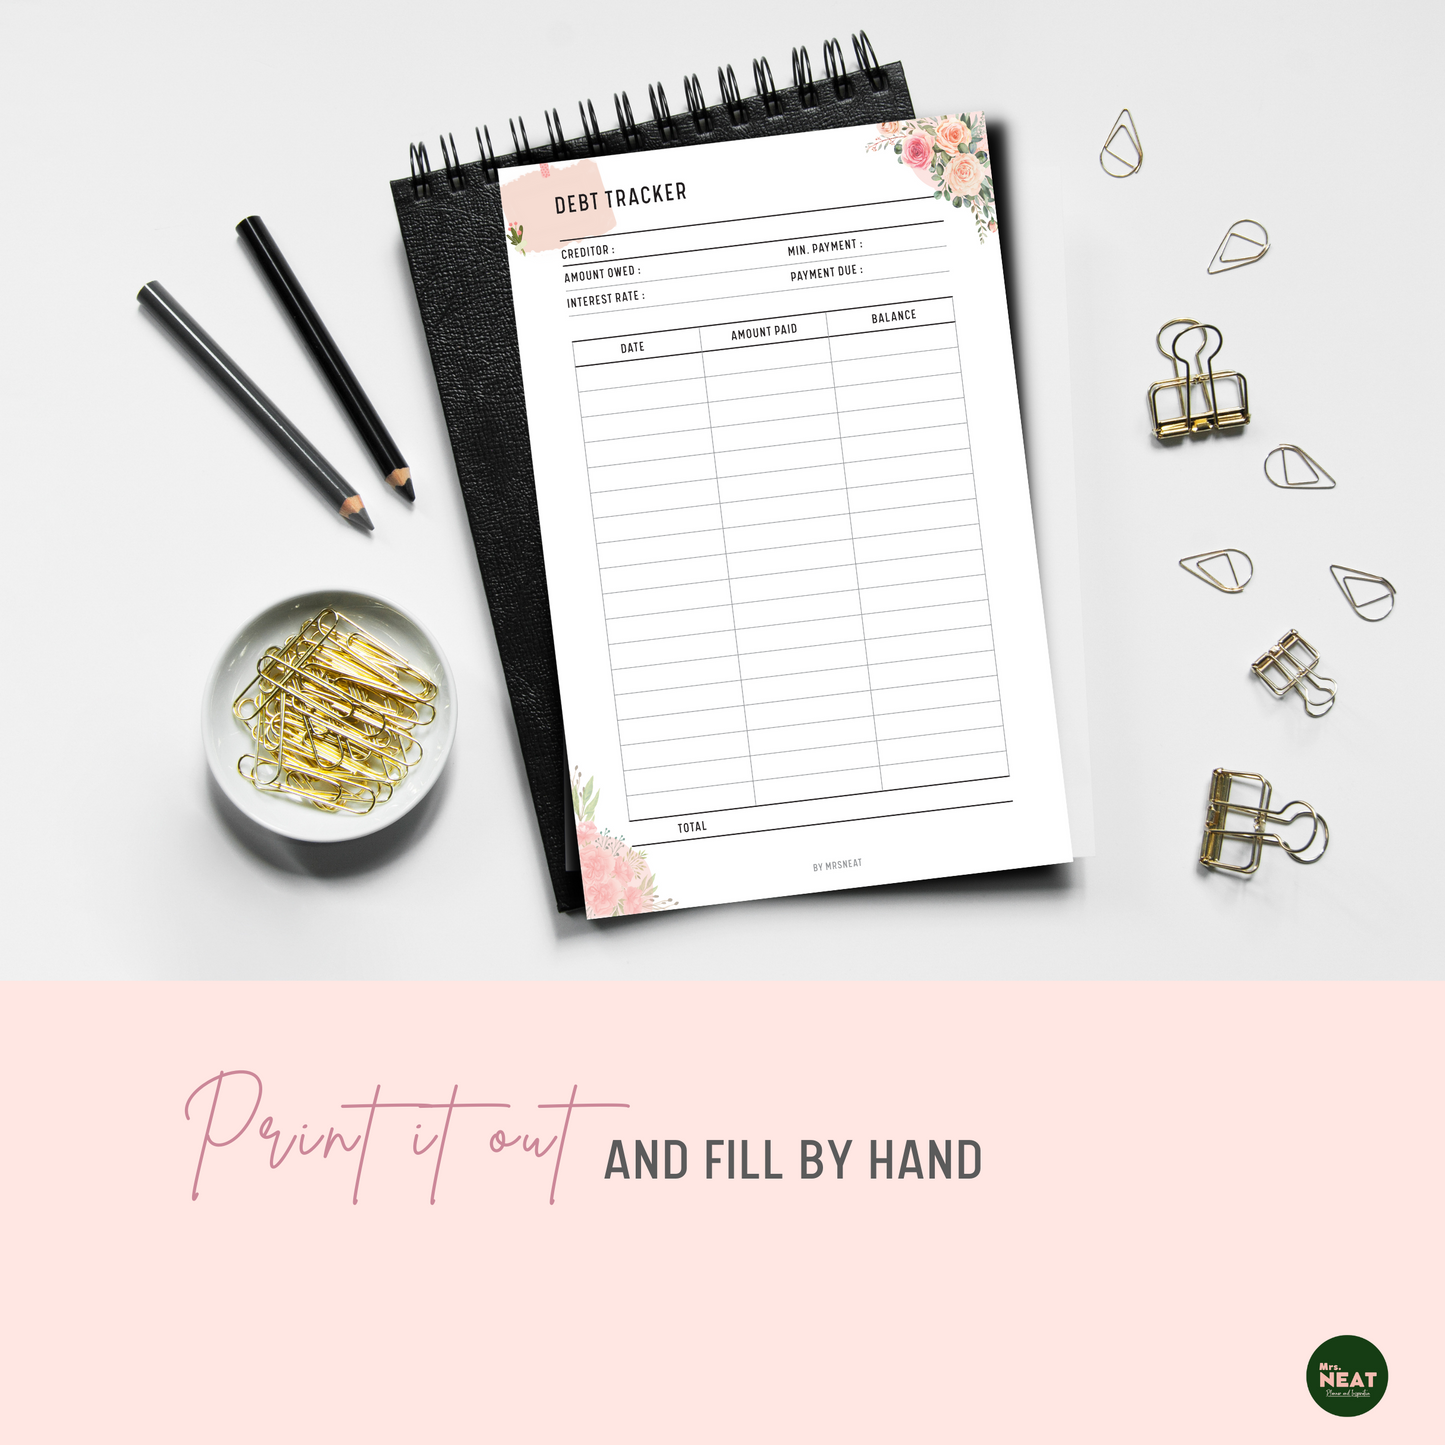 Floral Pink Debt Payment Tracker Planner Printed out and put on the black book with stationery surround